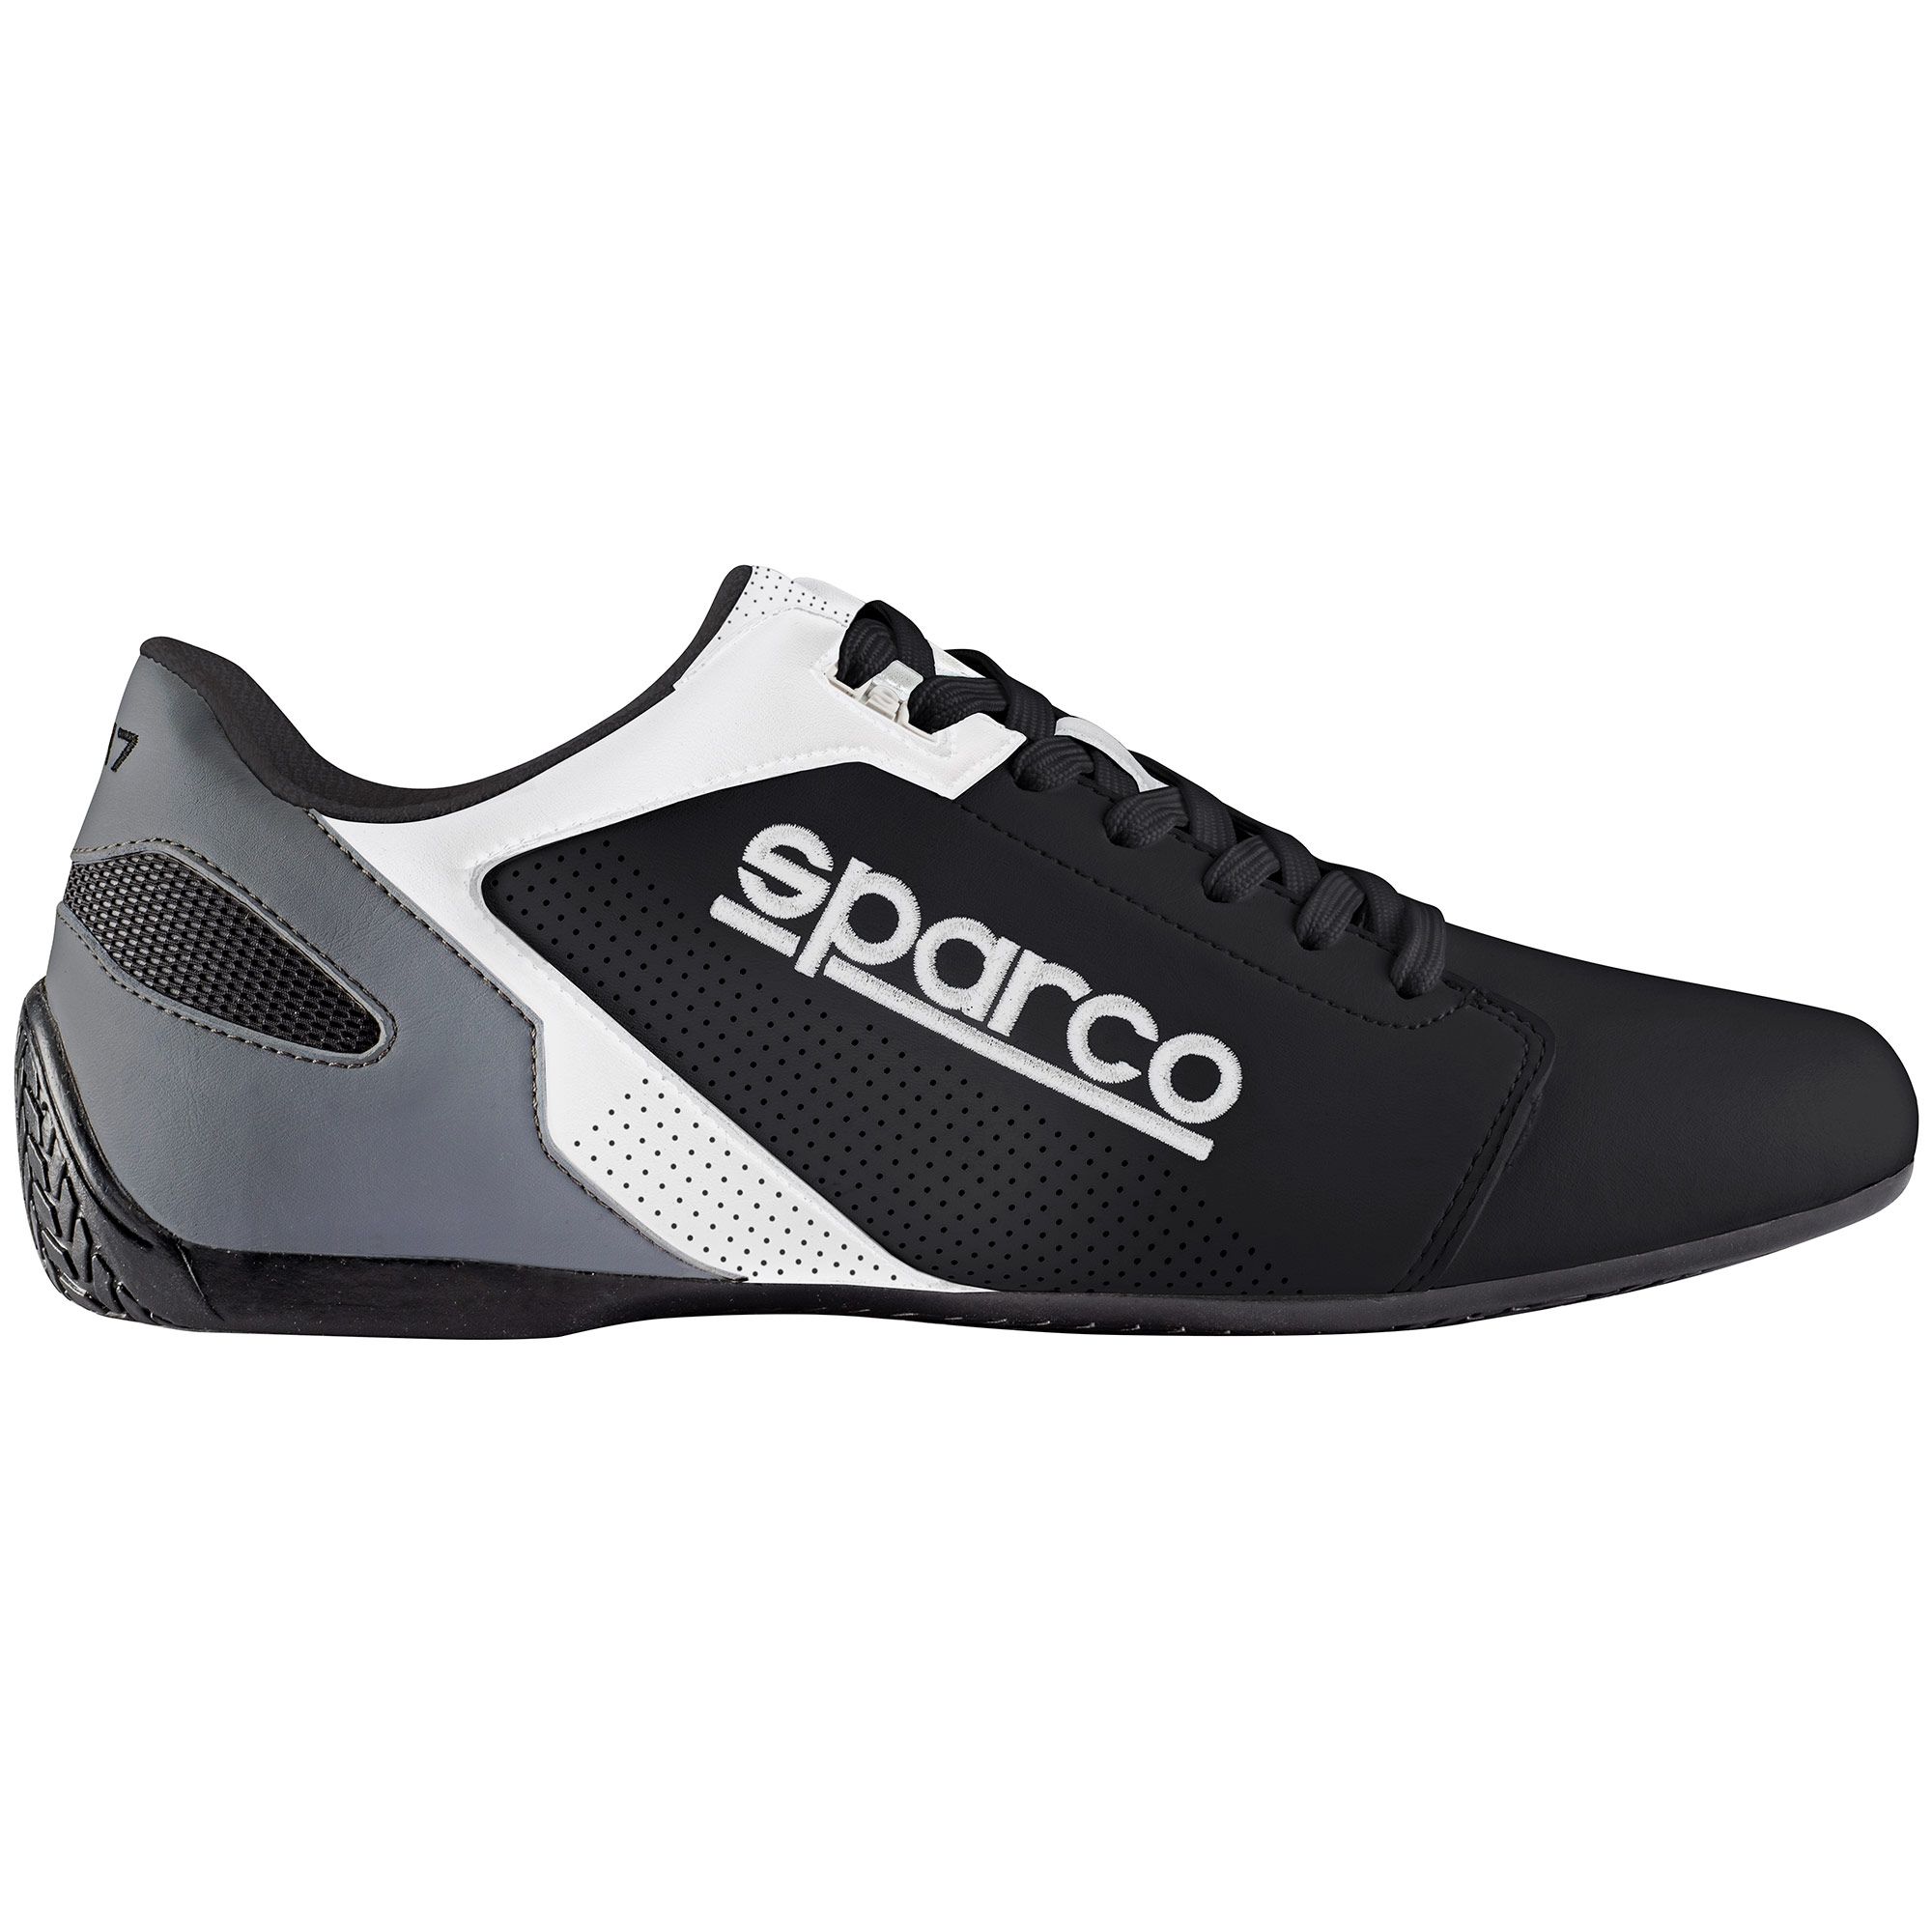 SPARCO SL-17 sneakers leisure low SHOES 